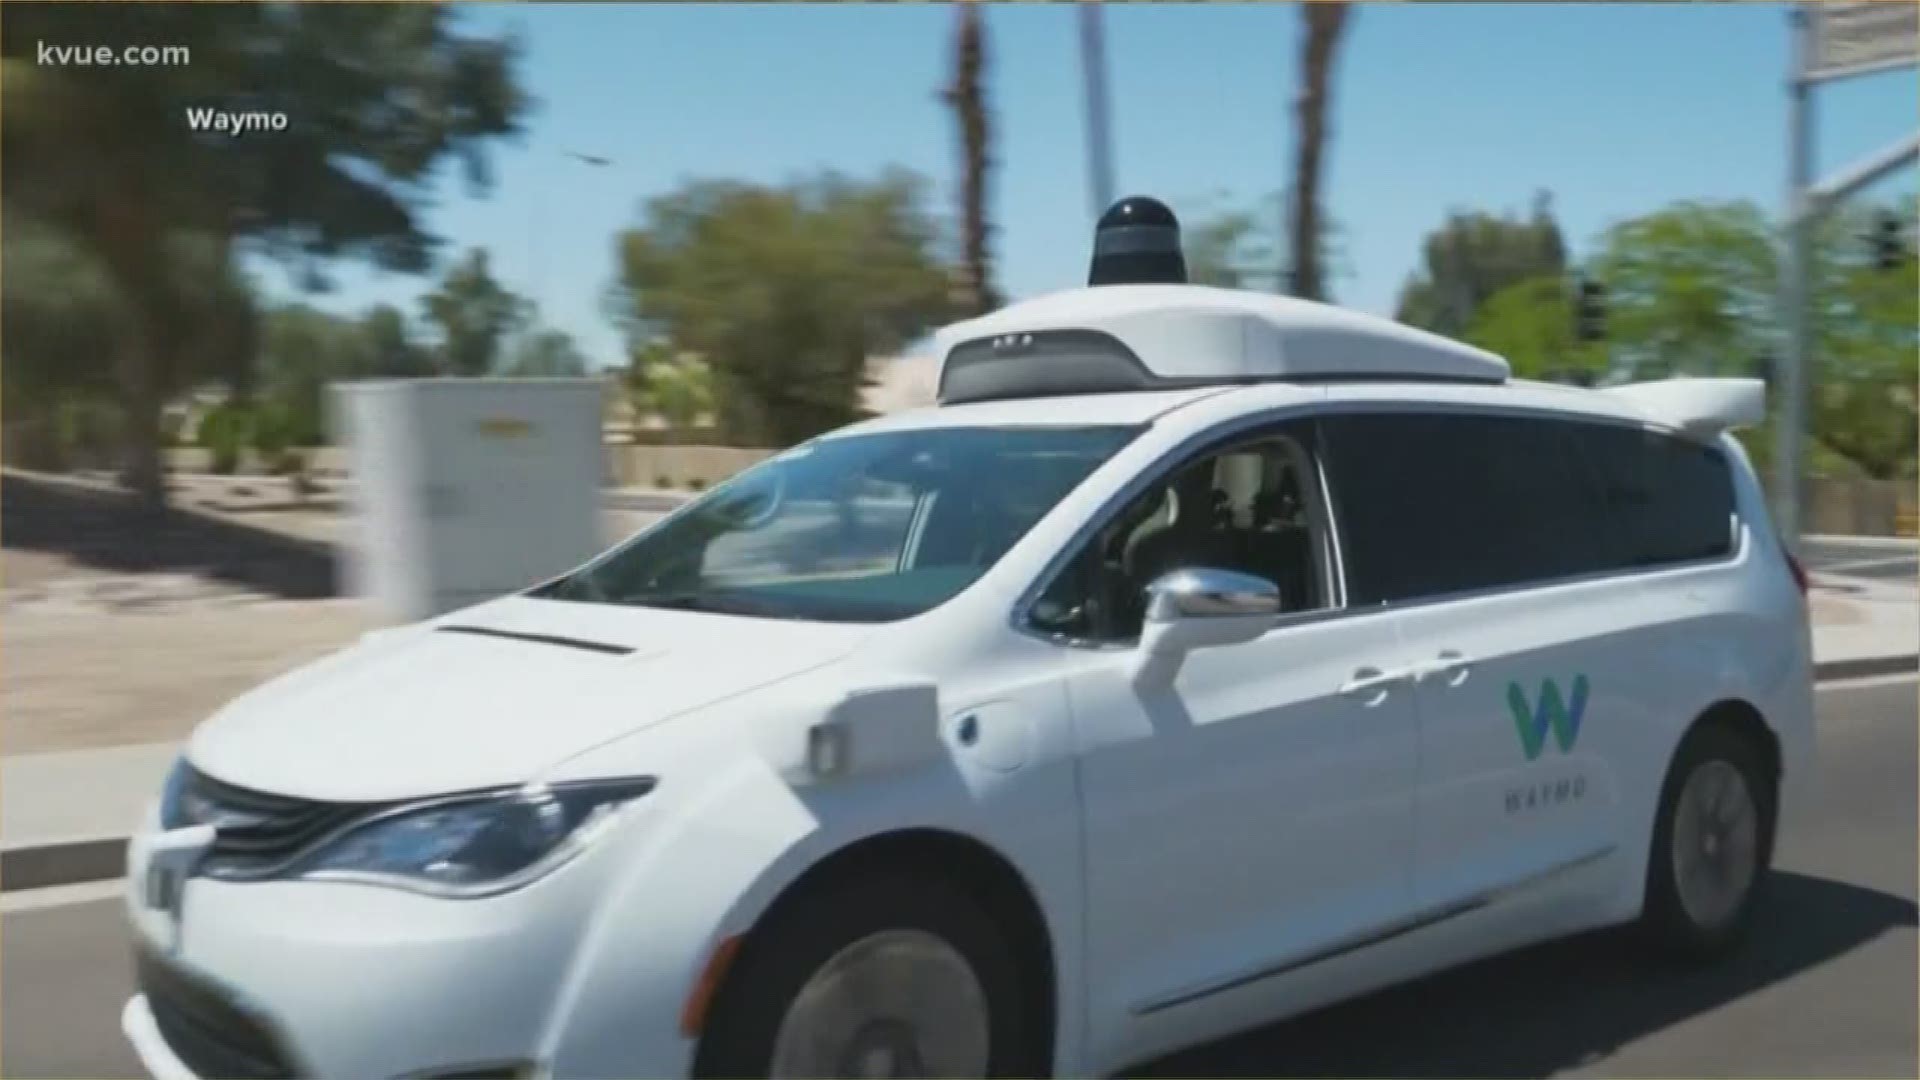 The company only had about 10 employees working in the city, but those employees are now being offered transitions to other Waymo's operations.